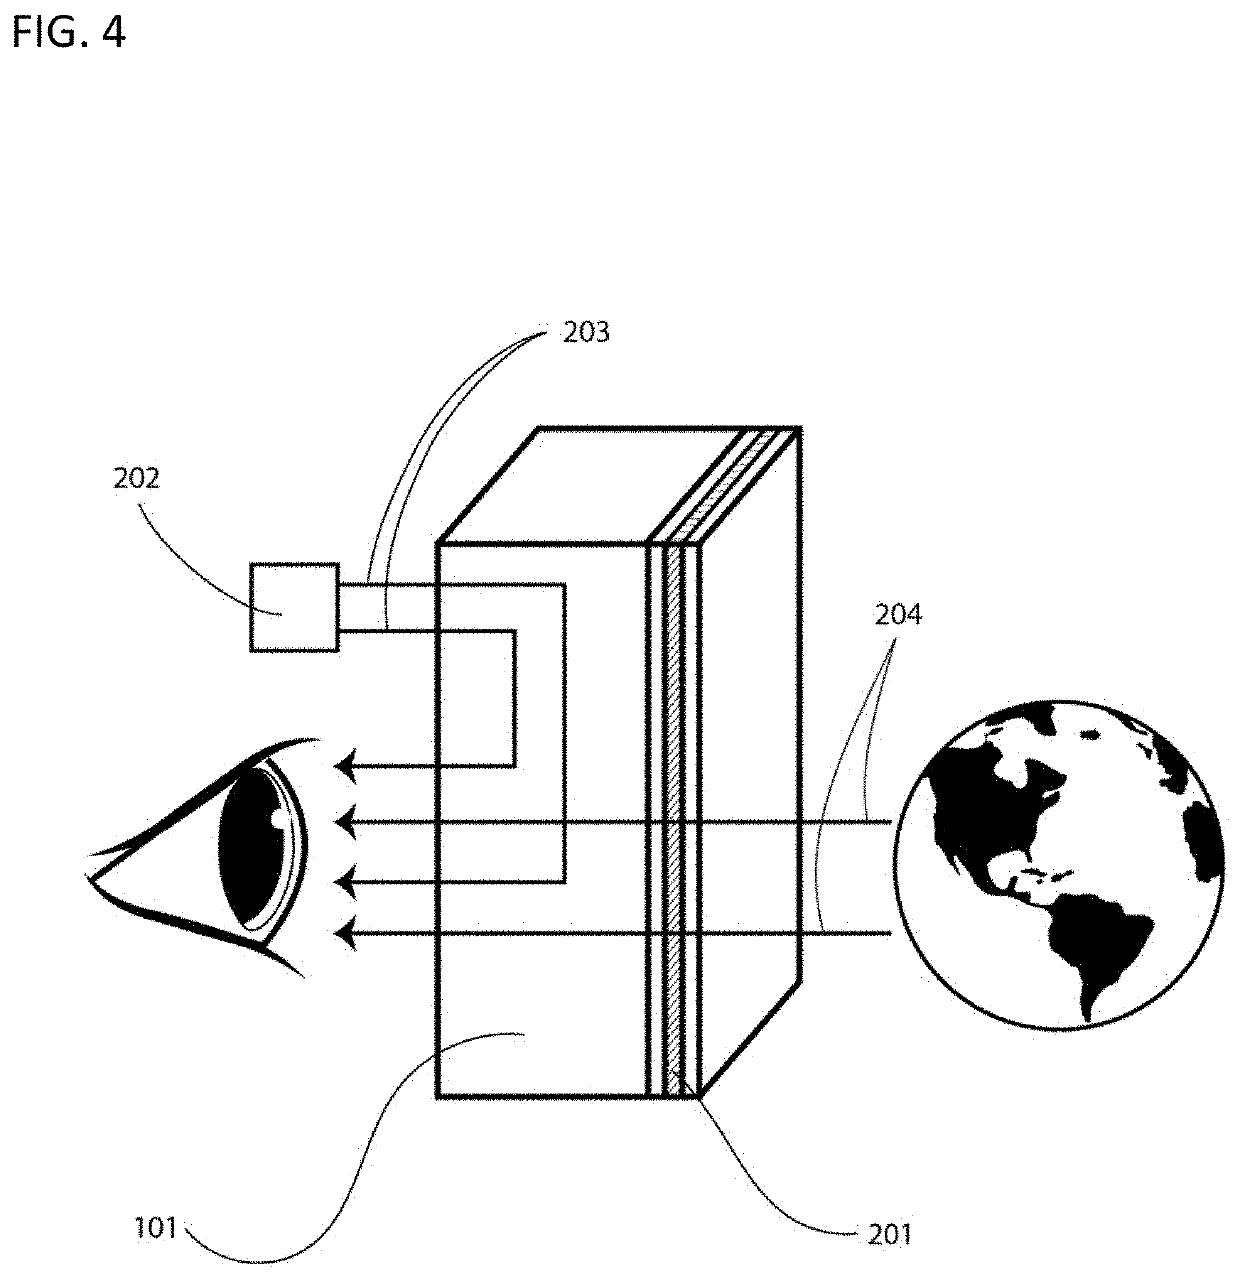 Optical layered composite having a reduced content of highly refractive layers and its application in augmented reality